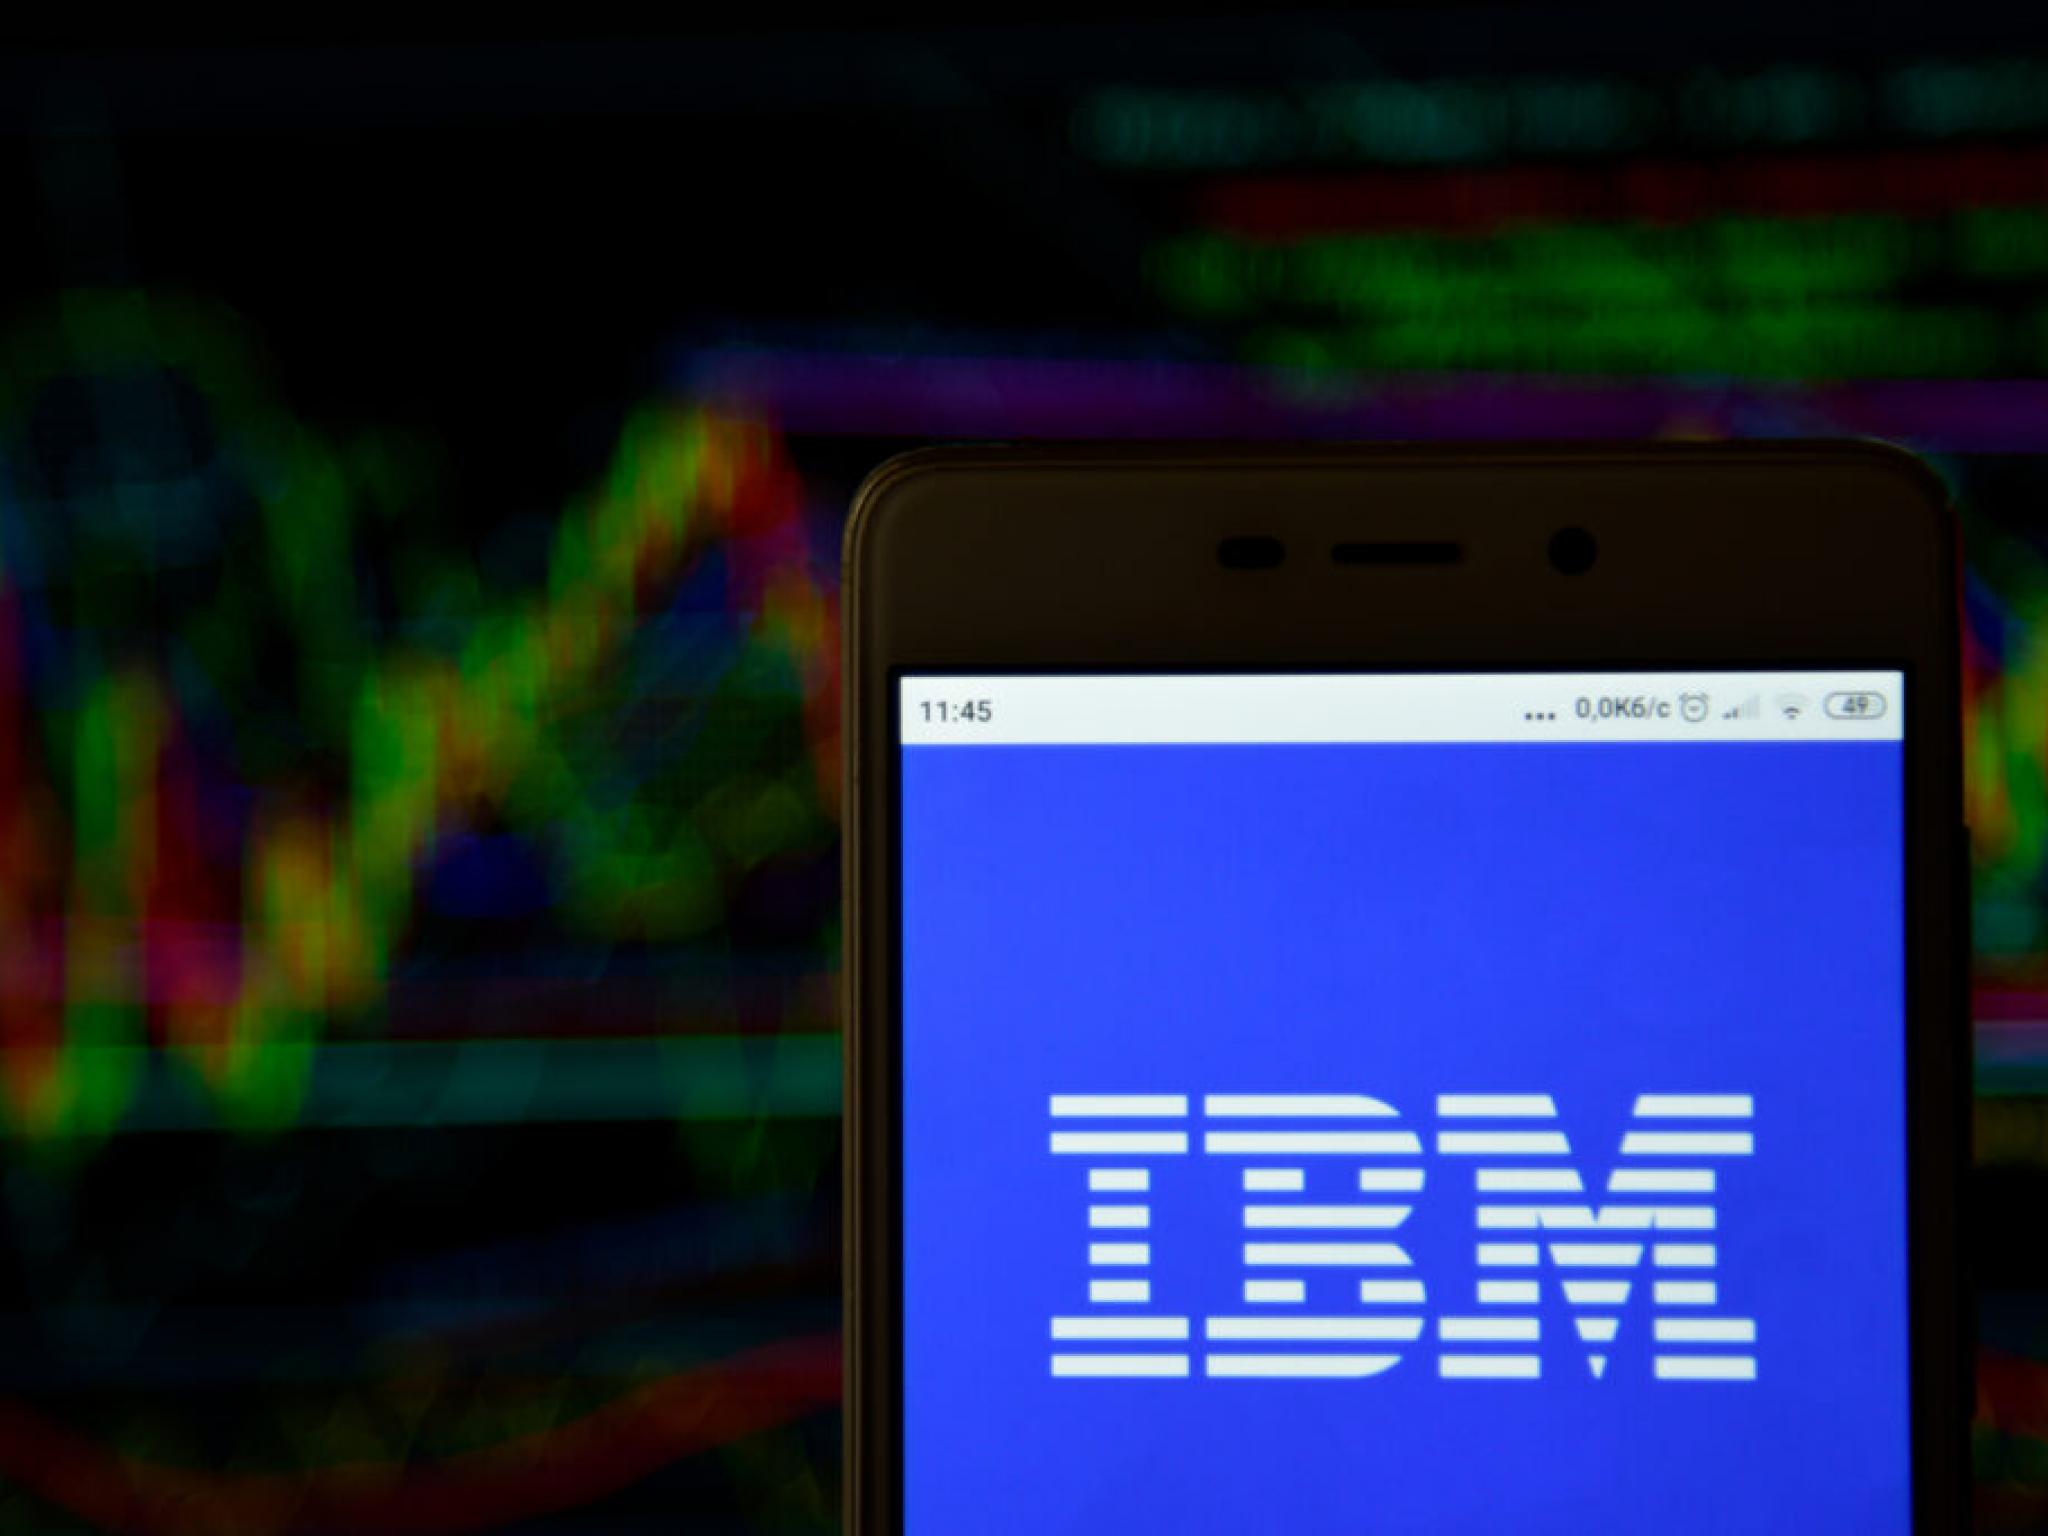  ibm-q1-earnings-revenue-miss-eps-beat-hashicorp-acquisition-ai-strategy-strength-and-more 